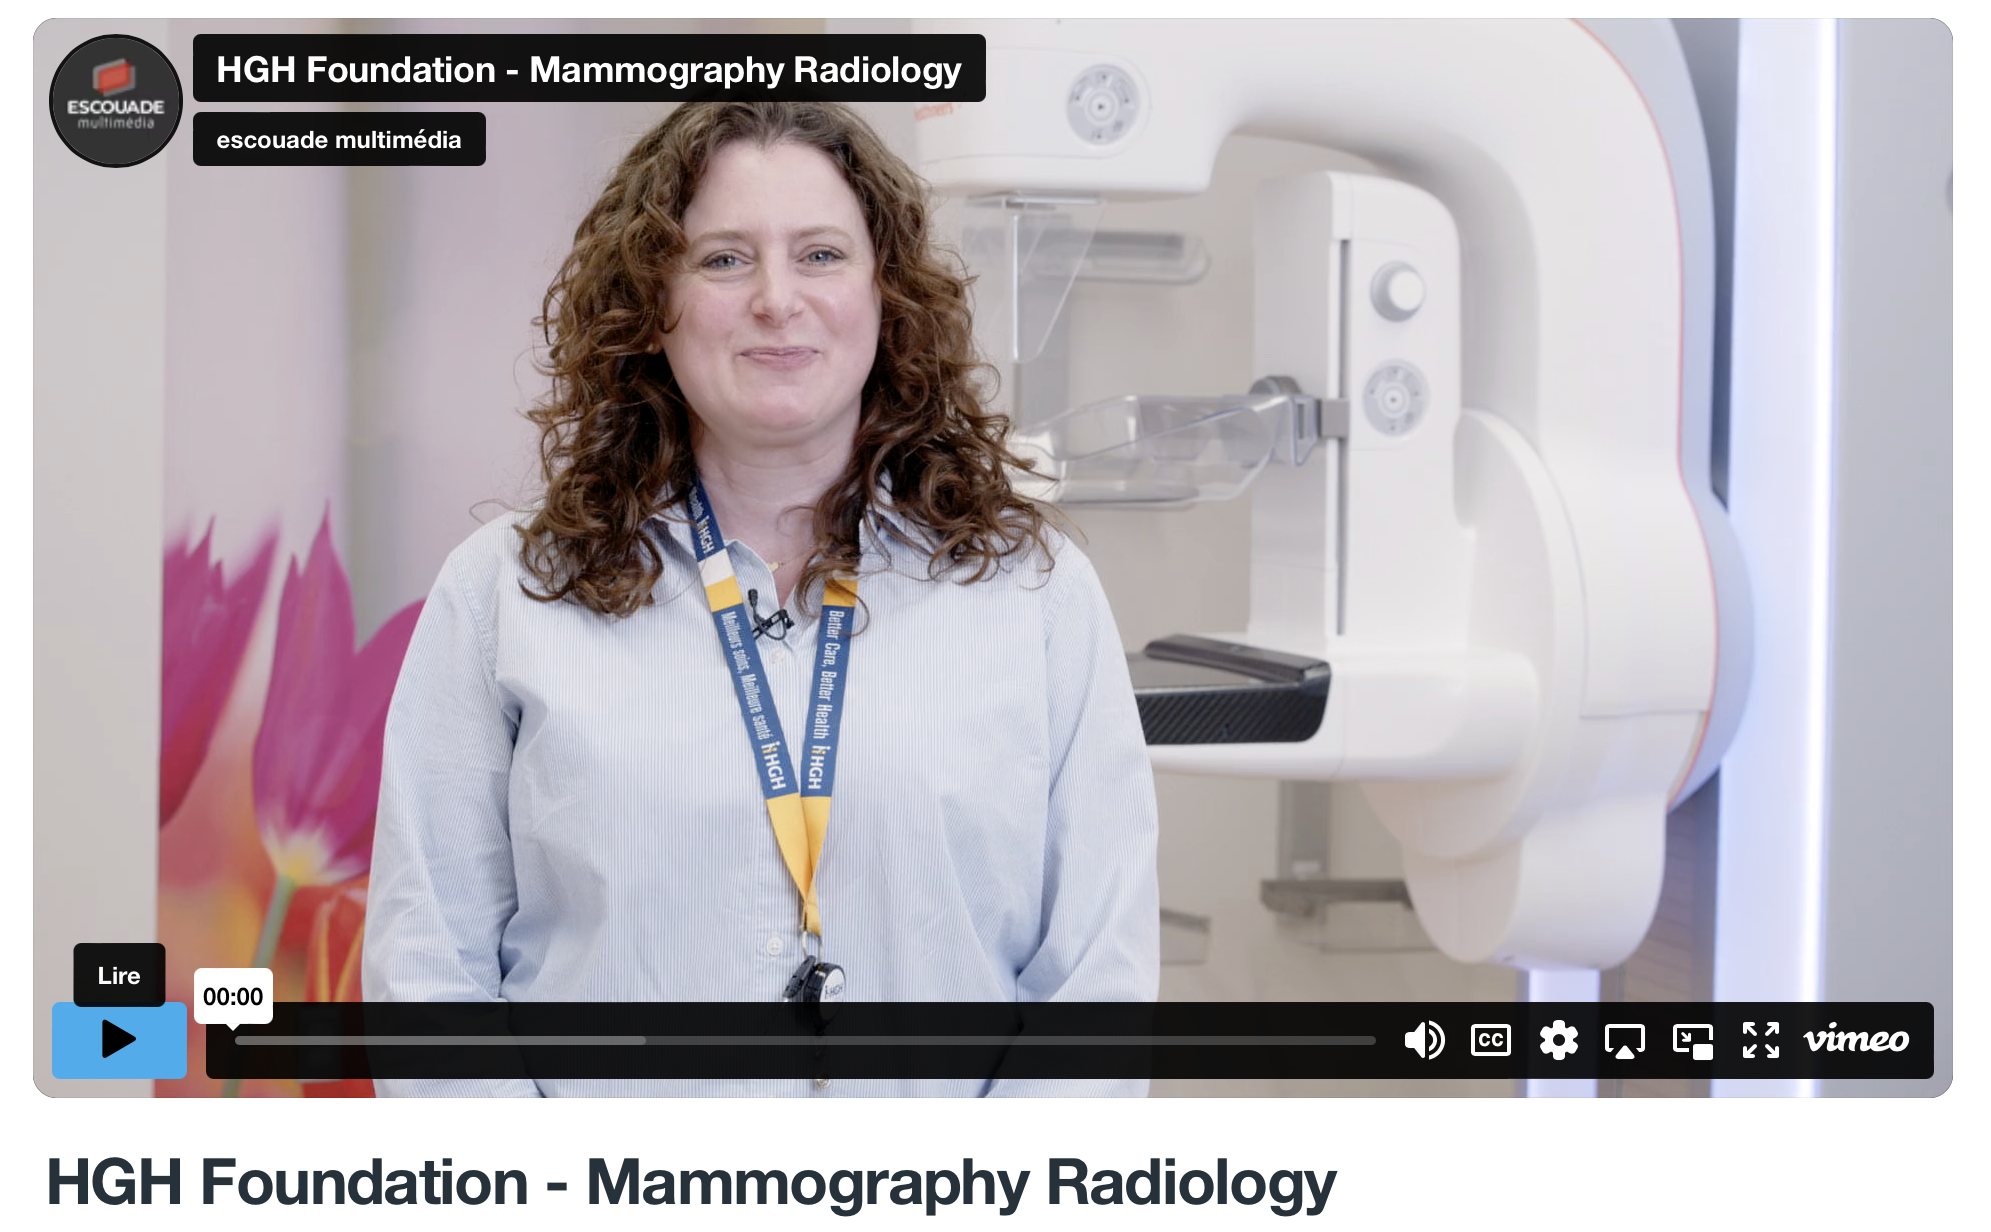 Erin Tabakman, HGH Foundation Executive Director in front of new mammography machine